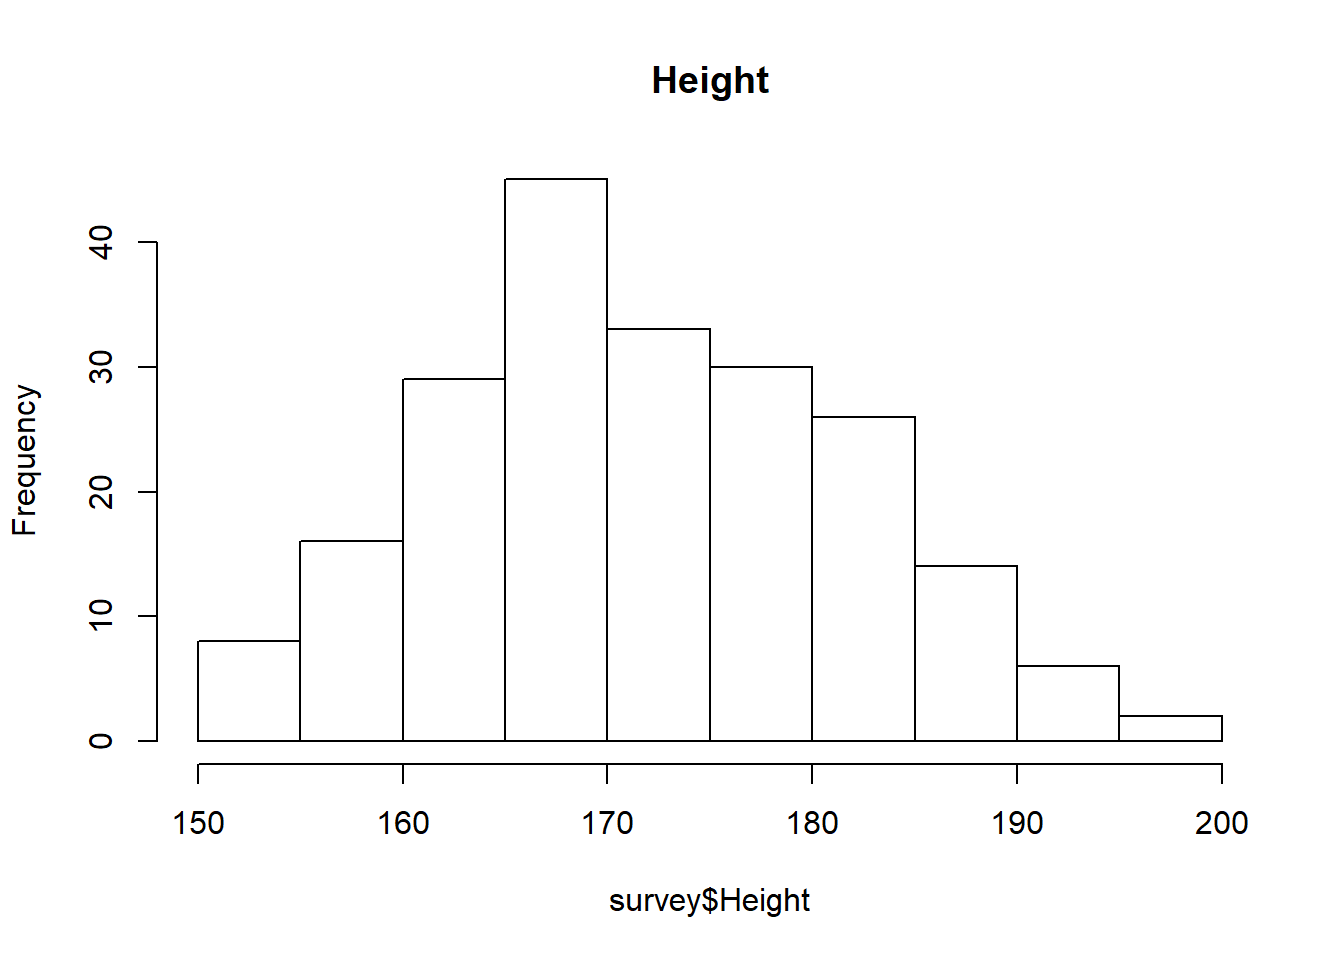 hist_height.png